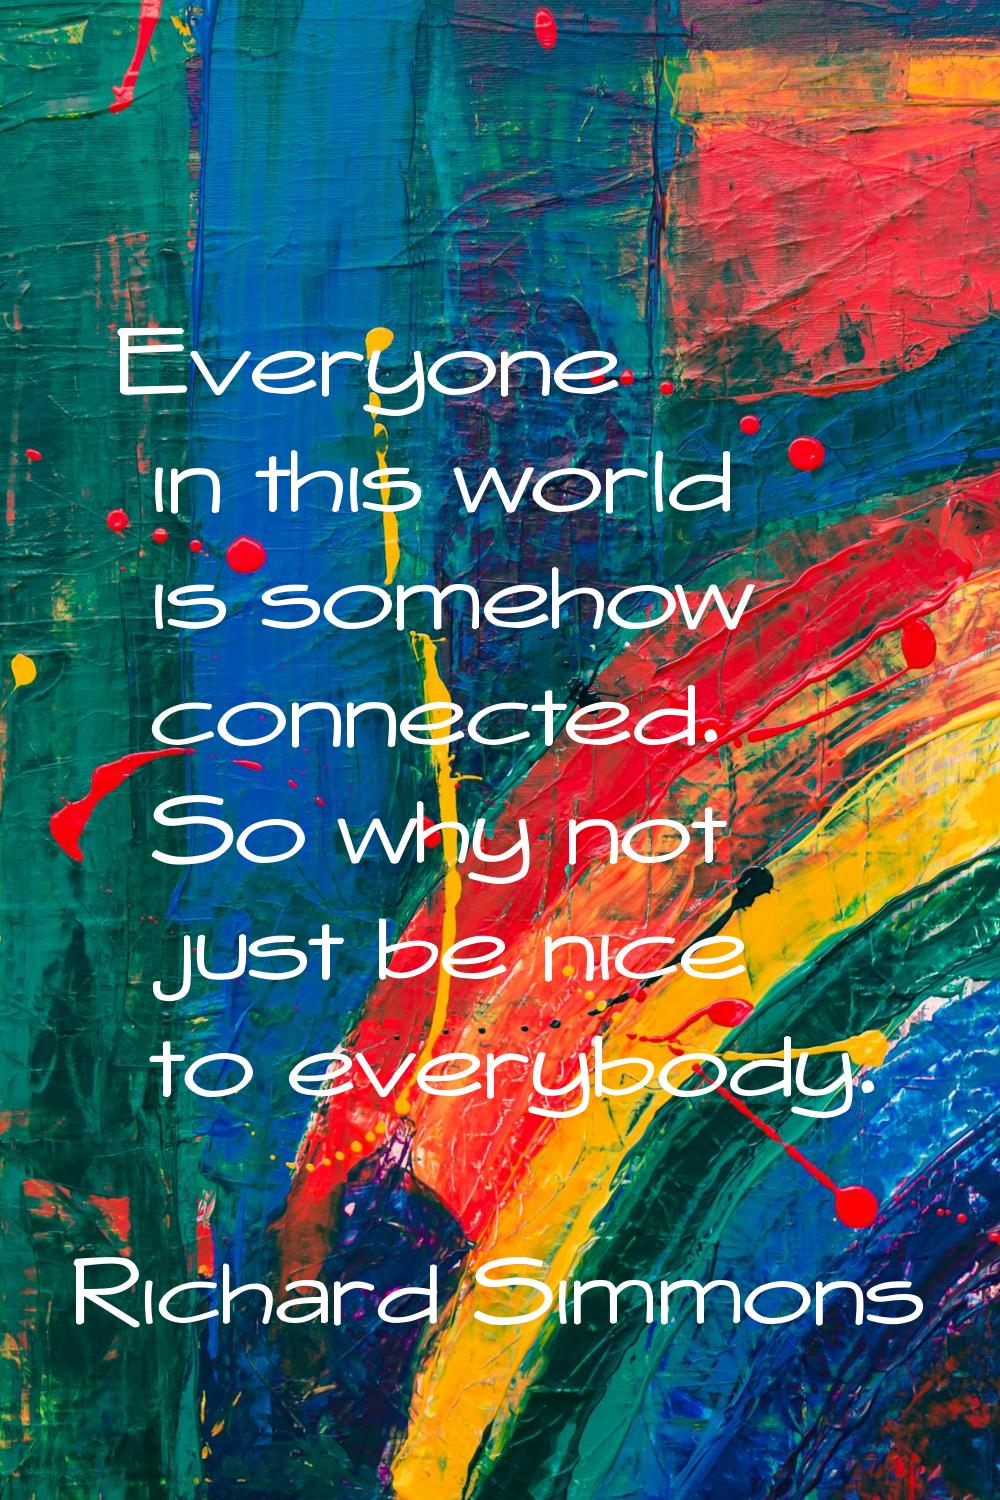 Everyone in this world is somehow connected. So why not just be nice to everybody.